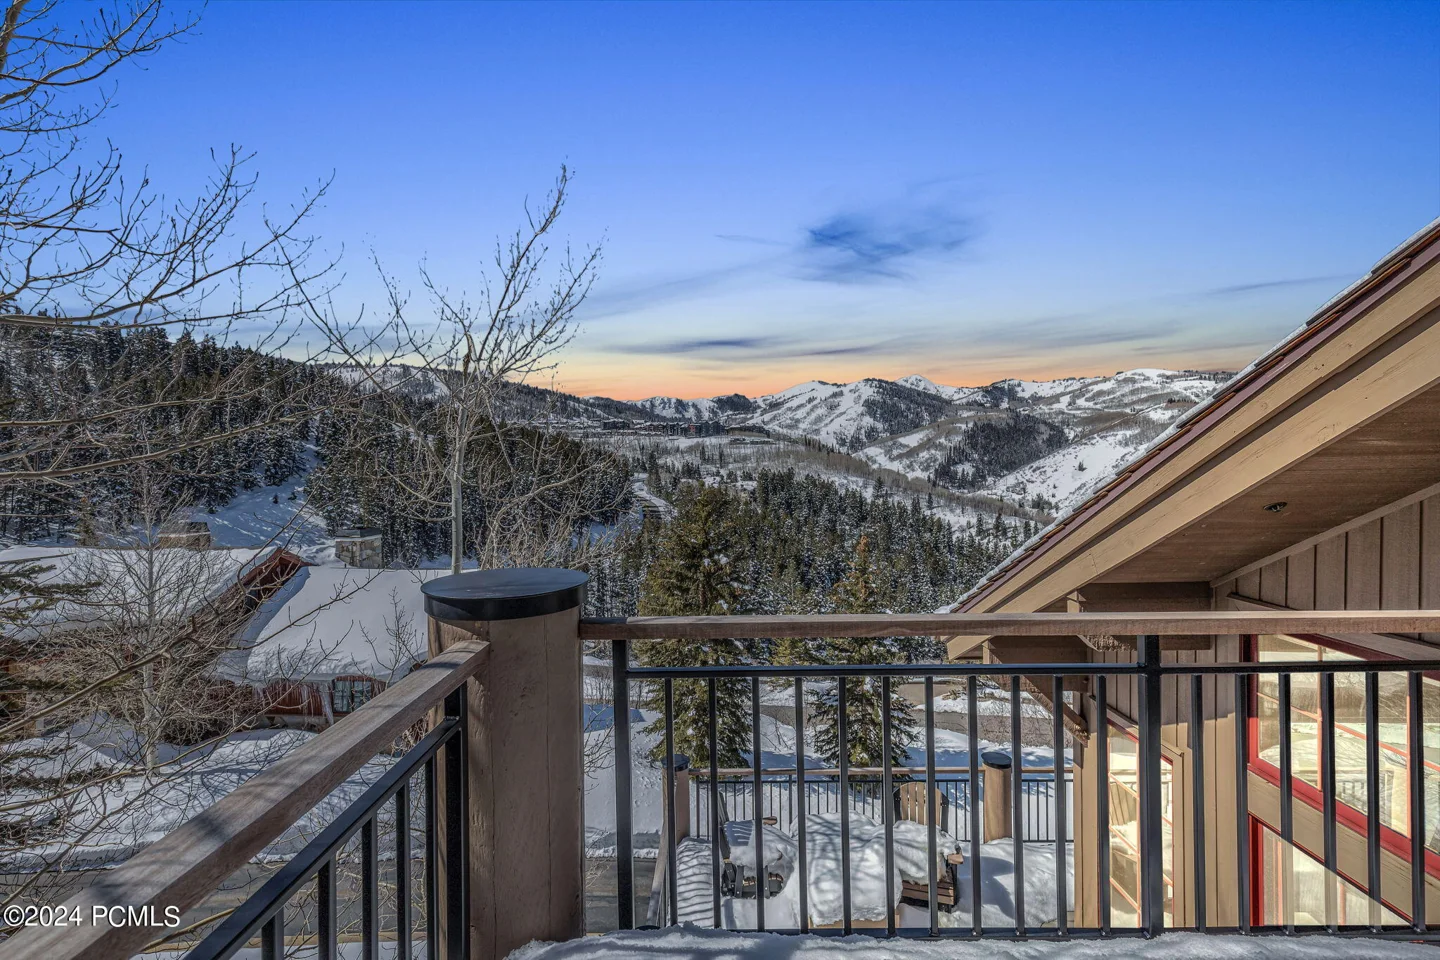 Experience the pinnacle of mountain living